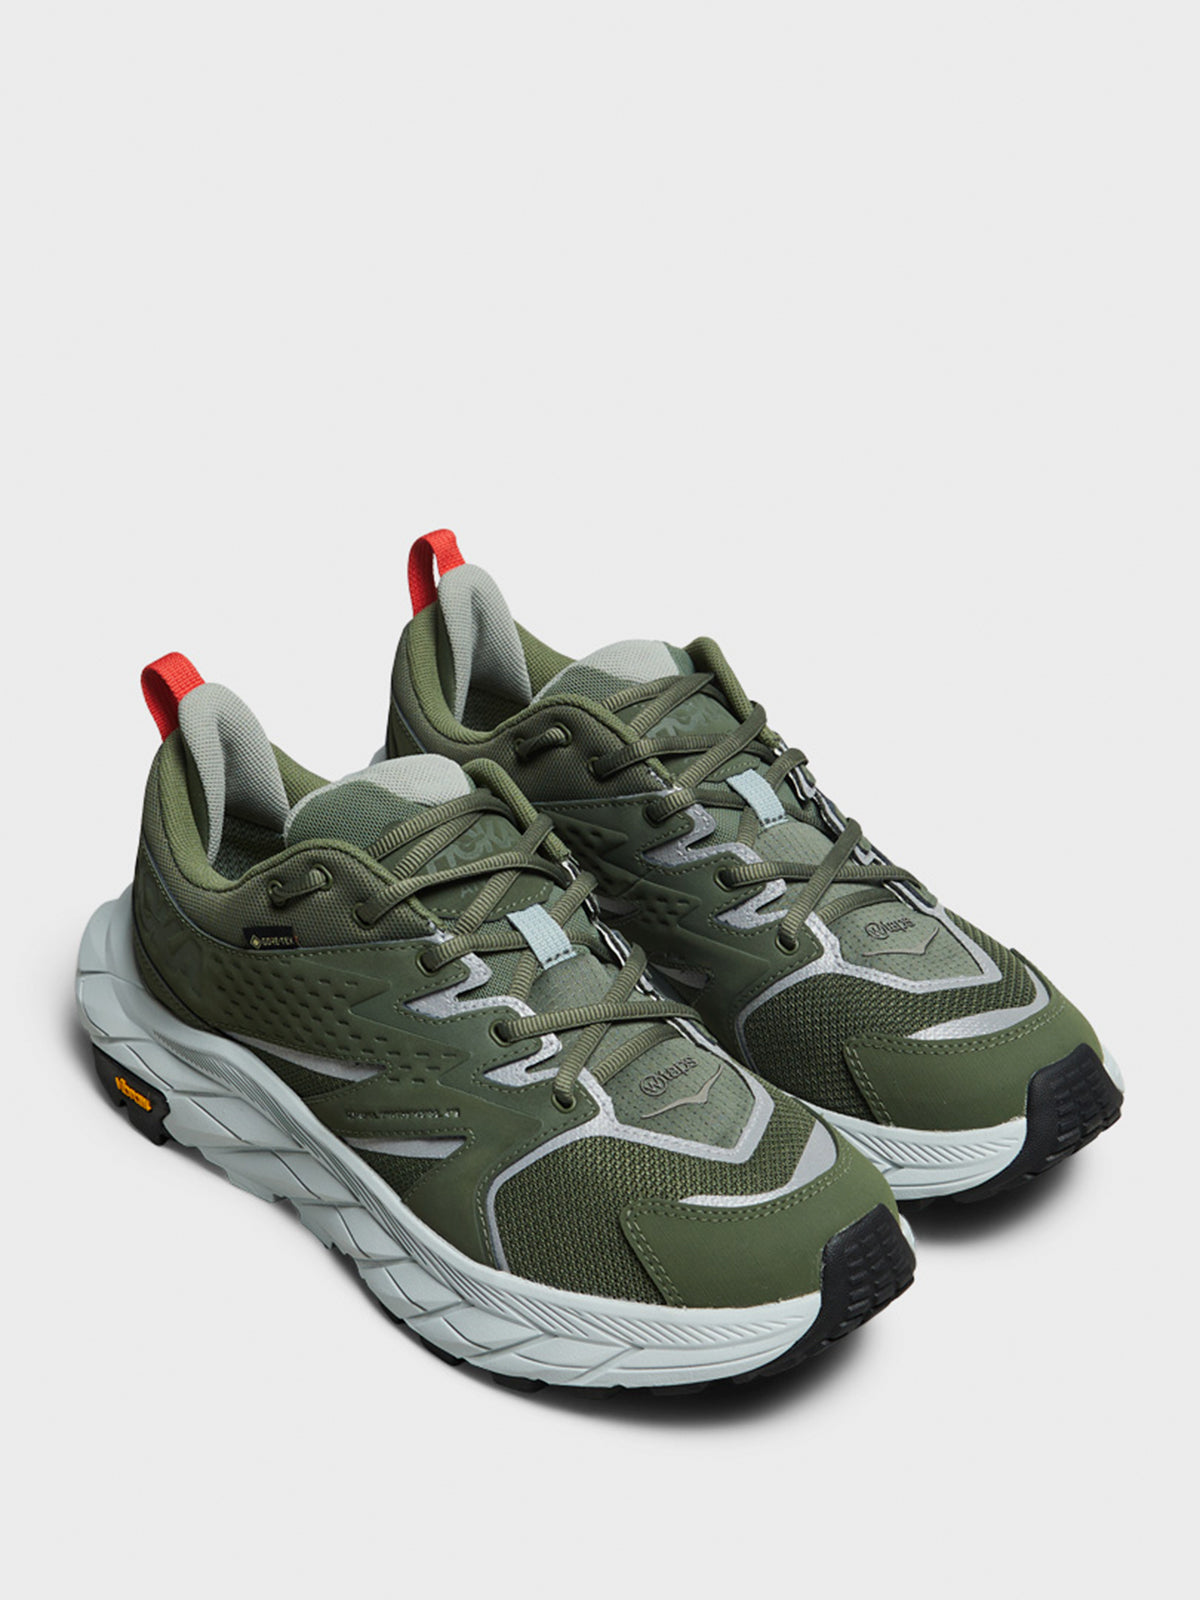 U Anacapa Low GTX WTAPS Sneakers in Green and Grey